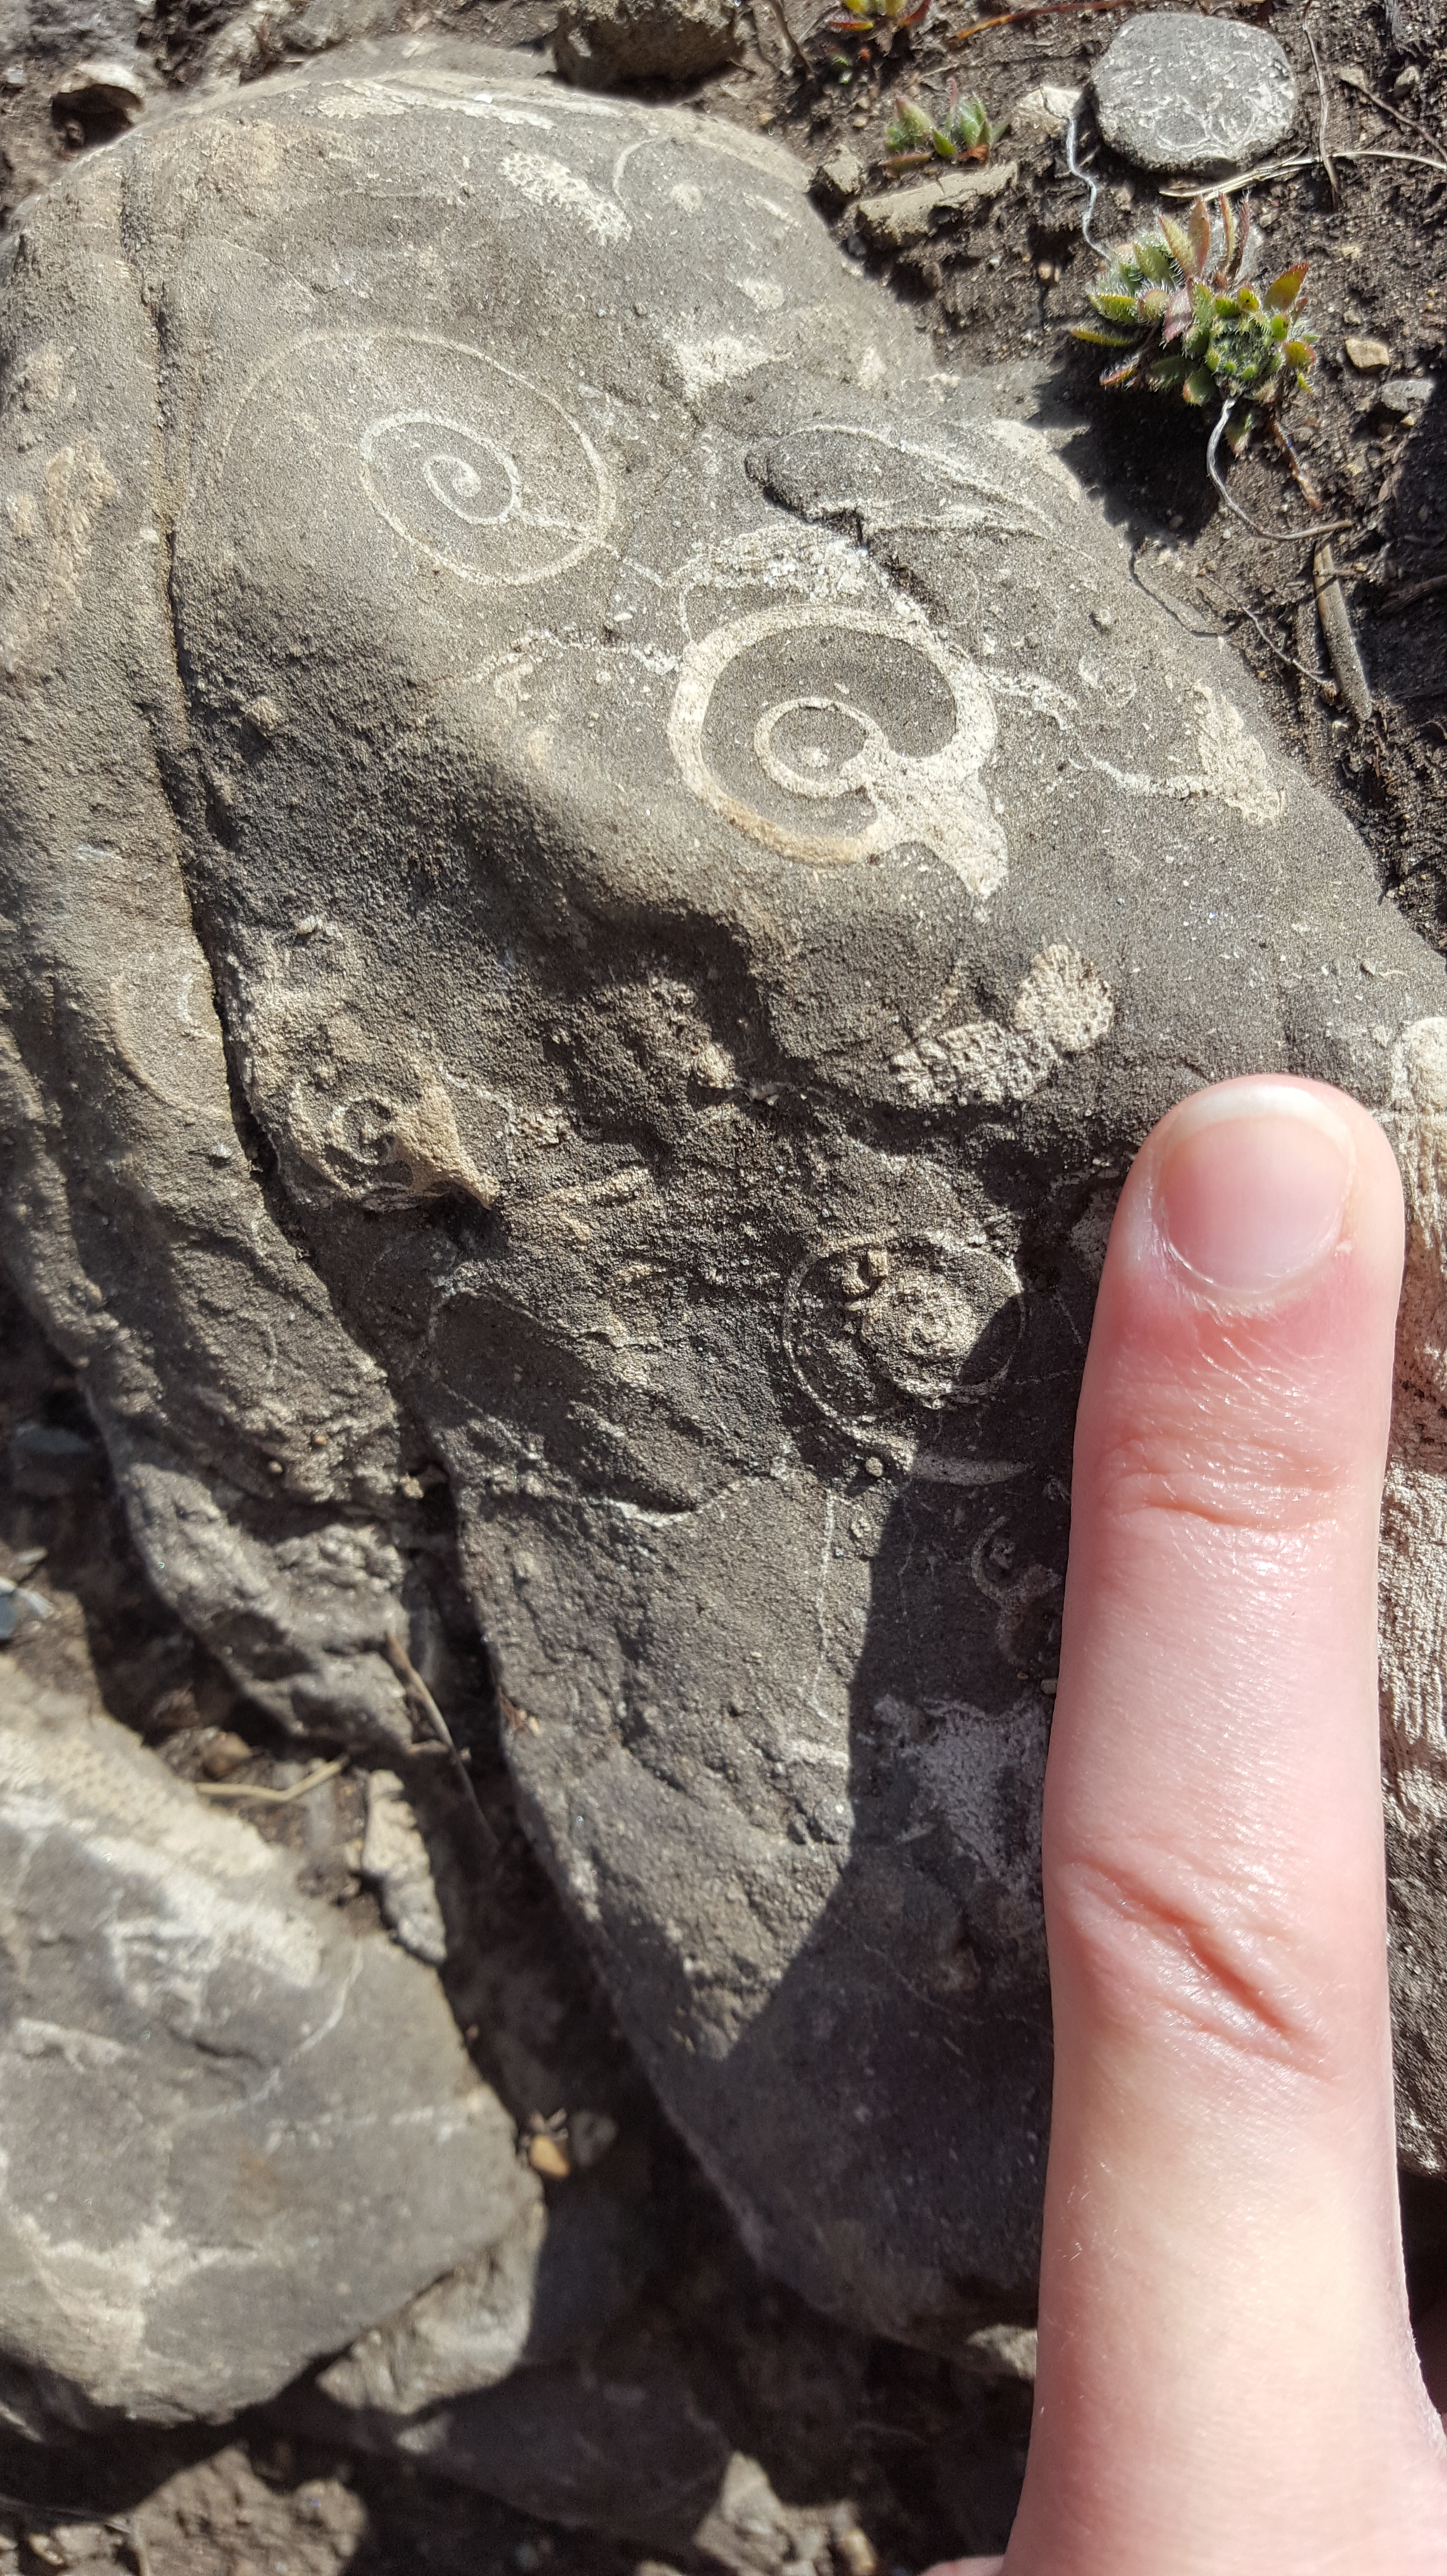 Another close up image of a rocky outcrop with a person's finger for scale with some cross sections of gastropod spirals visible. They are about 3 cm in diametre.